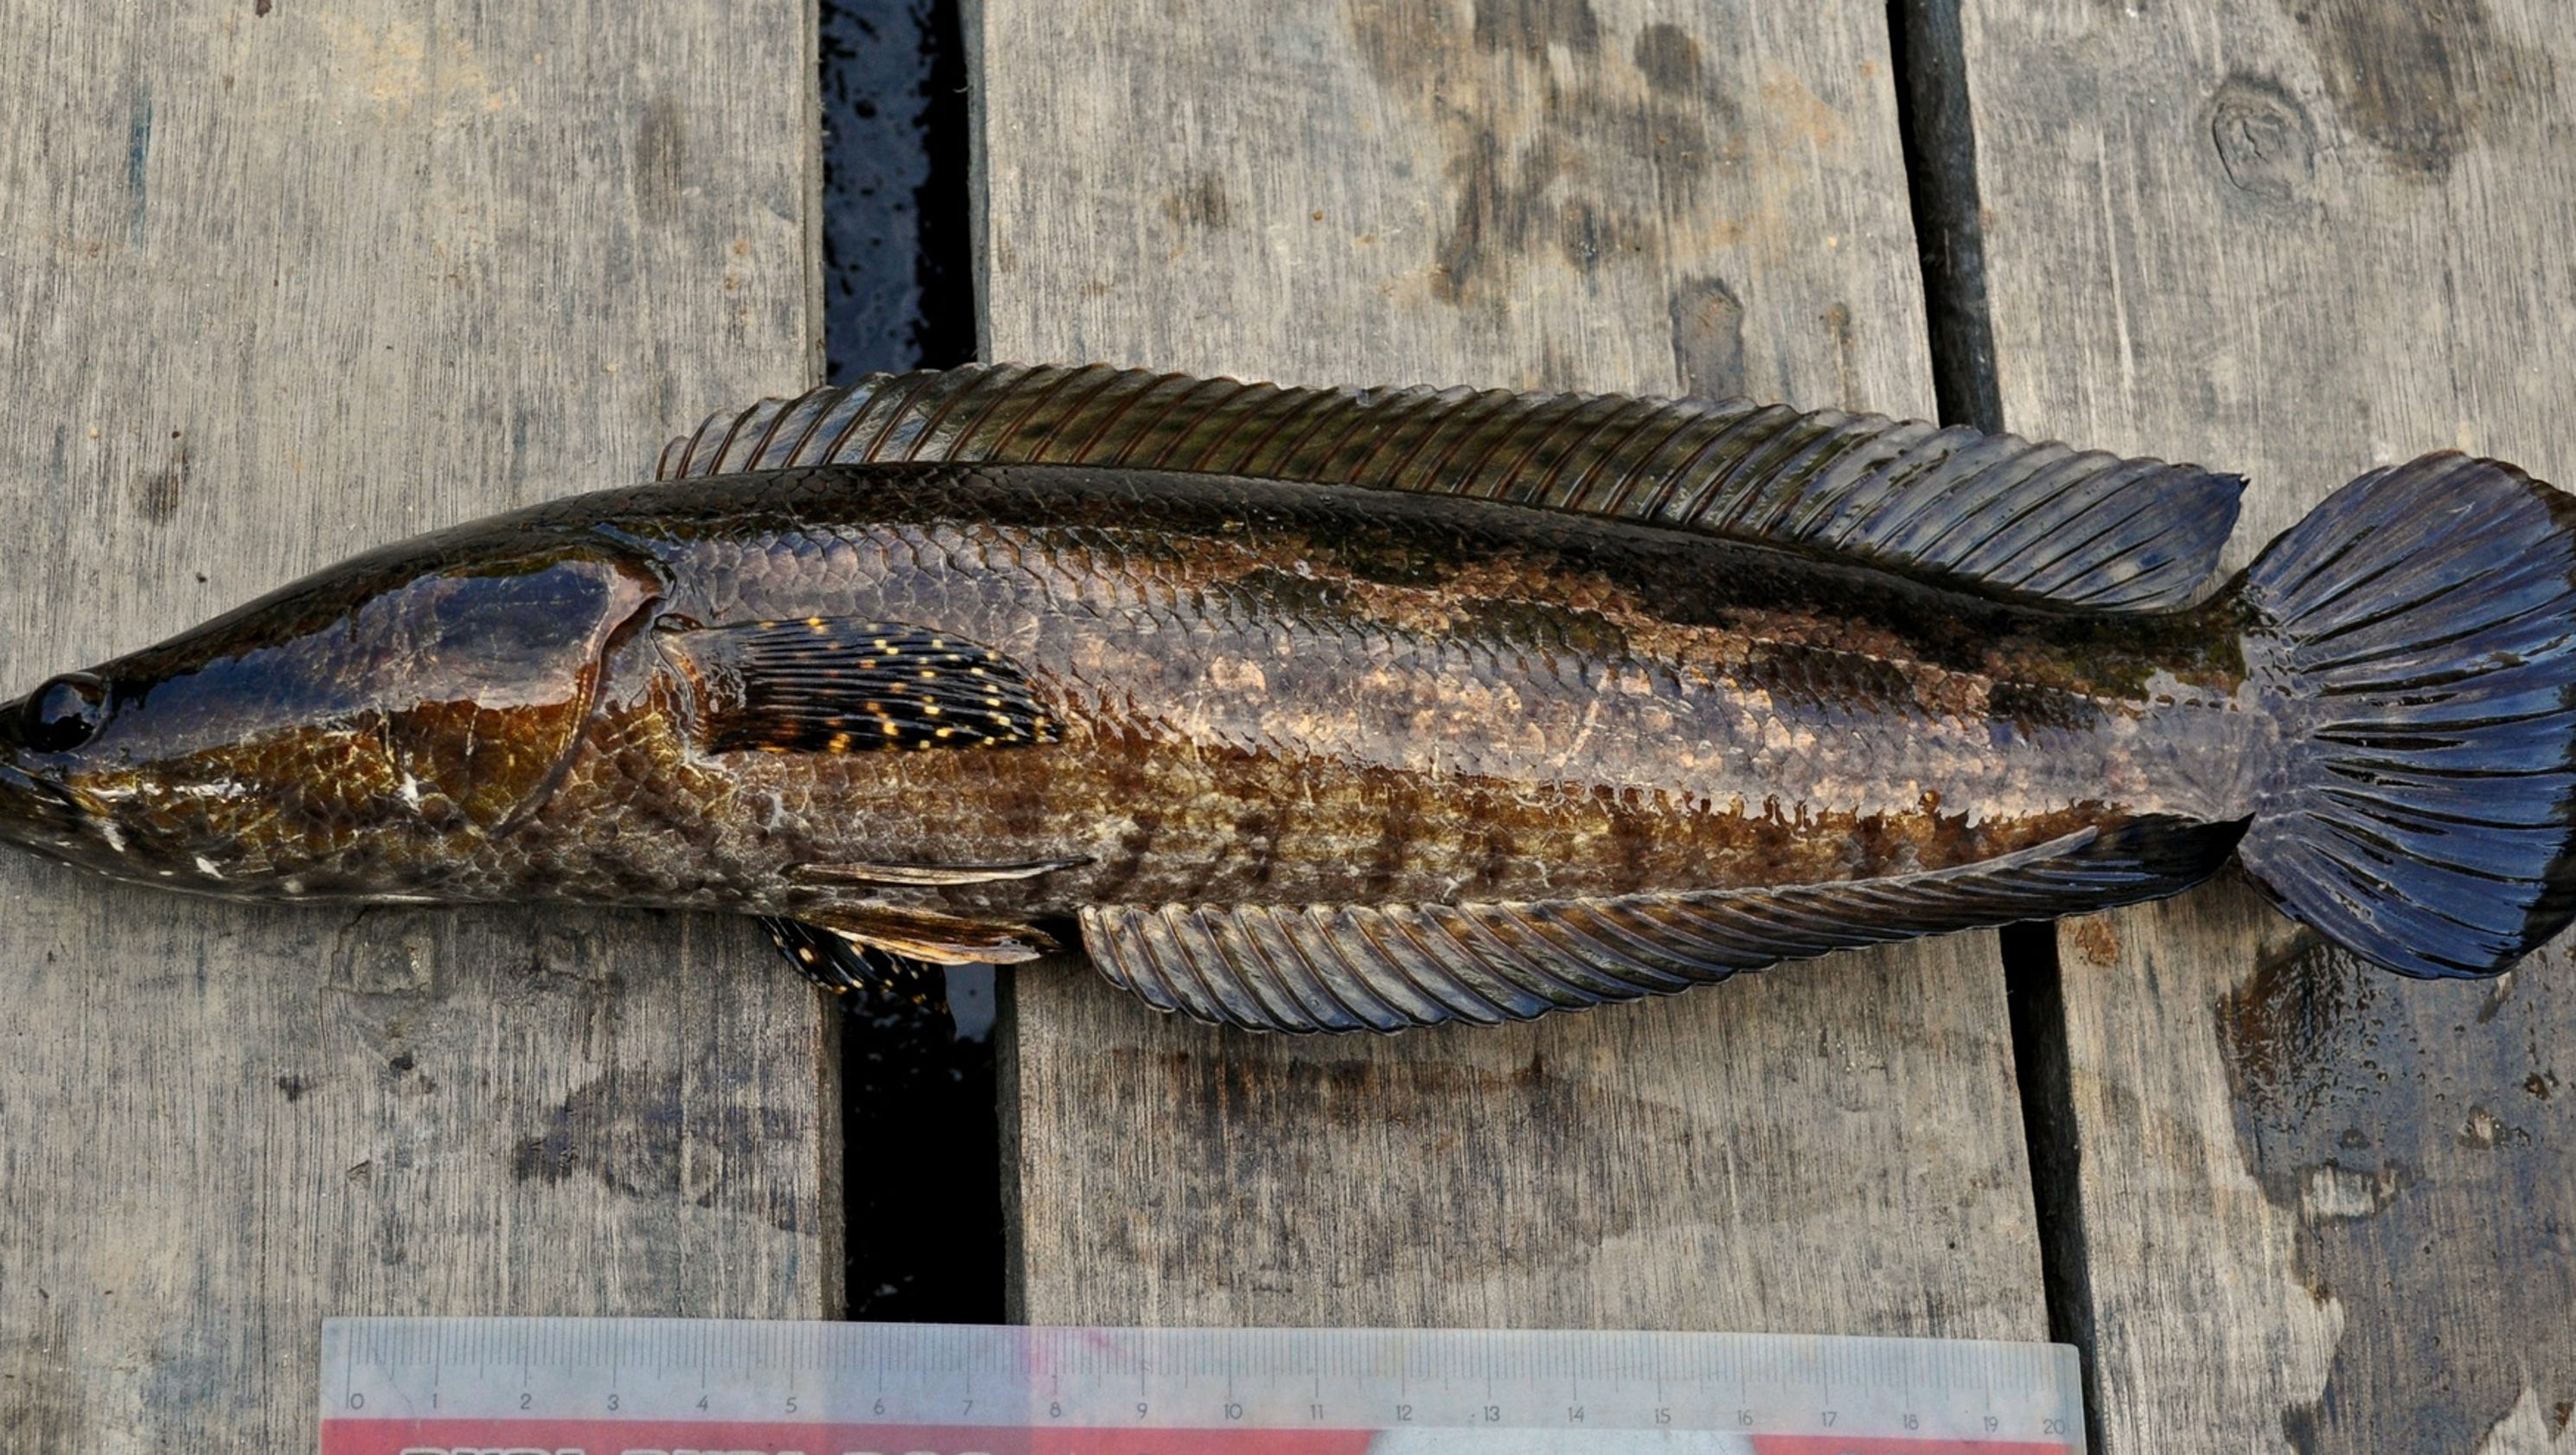 opinion-invasive-northern-snakeheads-are-menace-to-maryland-ecosystem